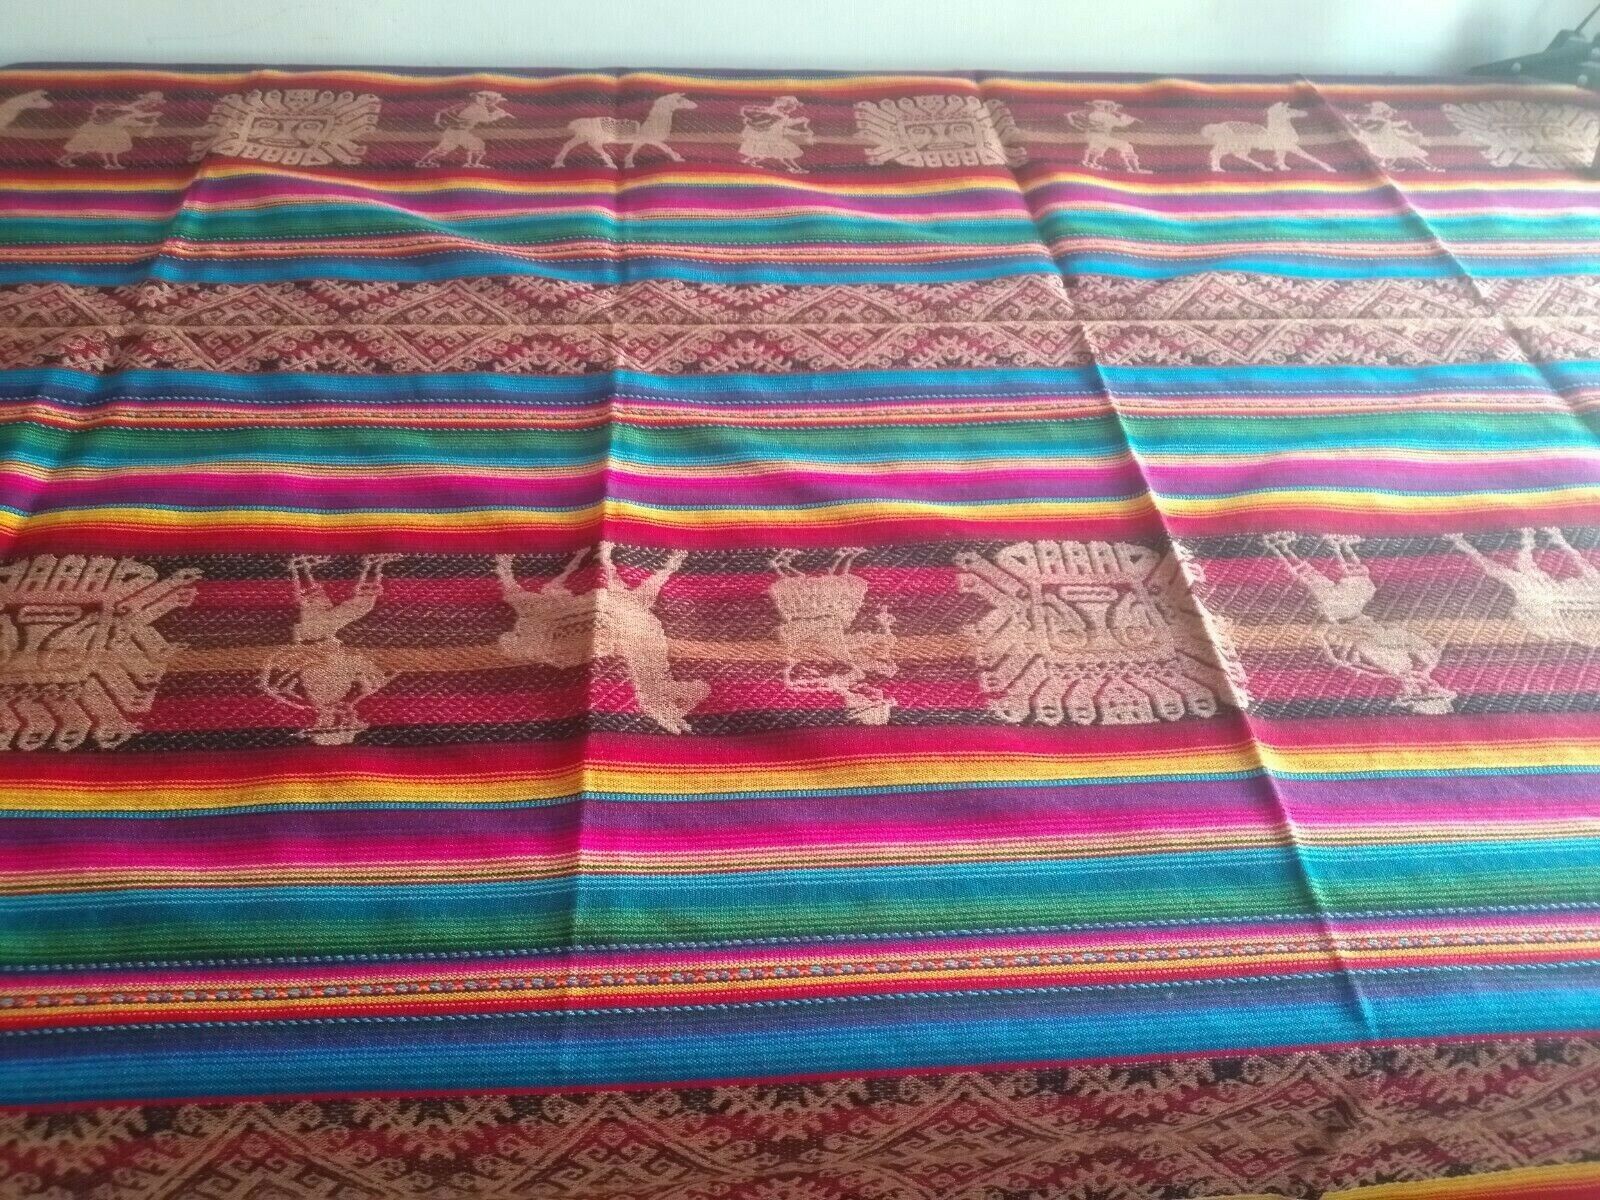 Peruvian blanket in wool different colors Andean community Puno